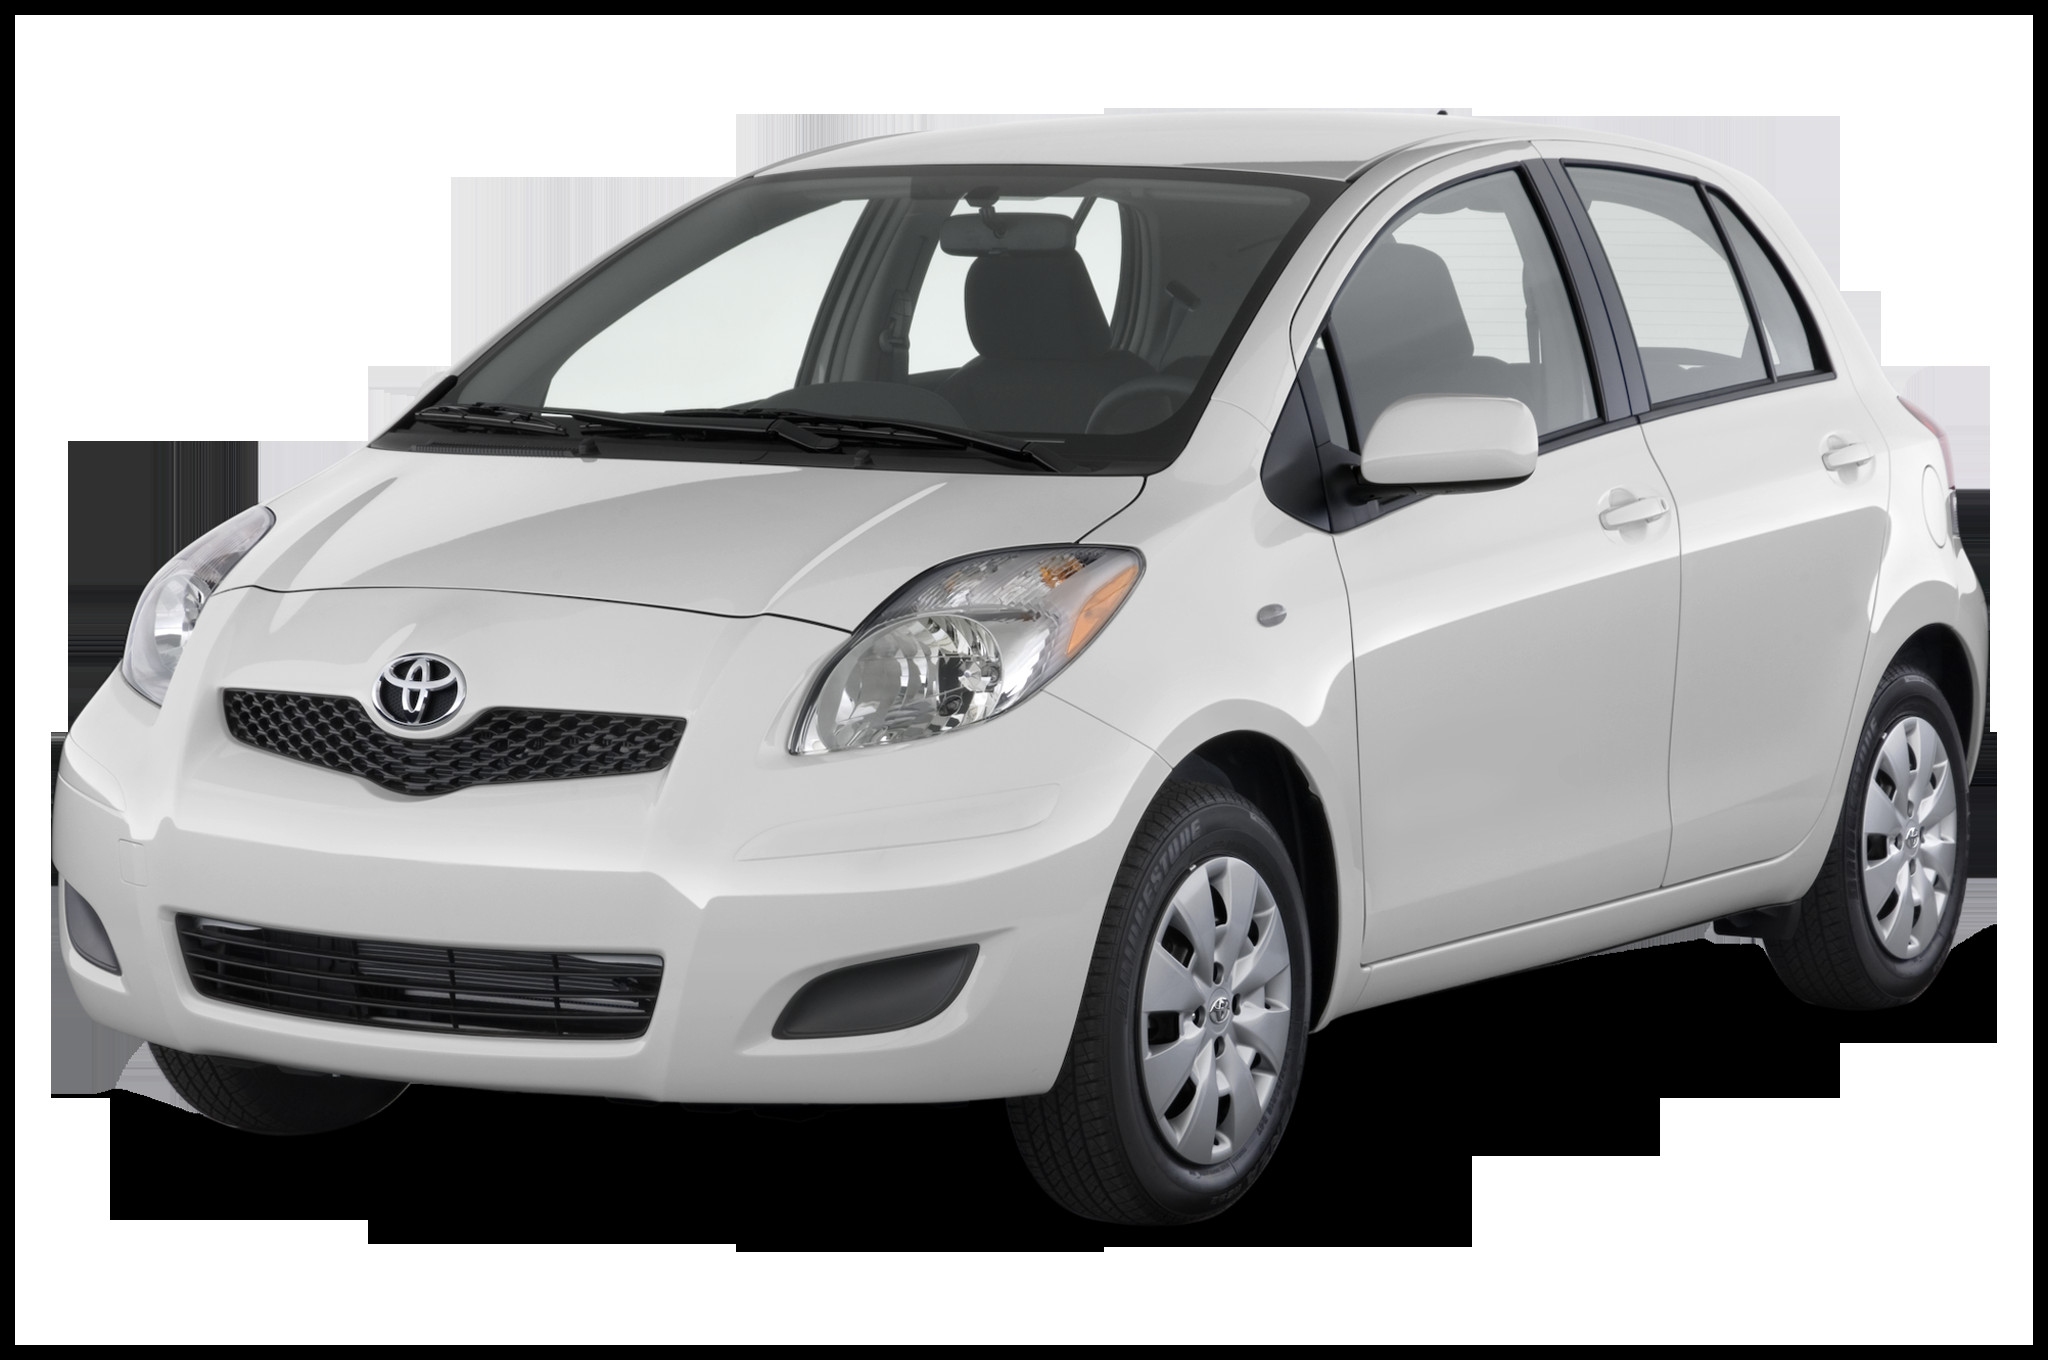 Toyota Yaris Mpg Luxury 2010 toyota Yaris Reviews and Rating